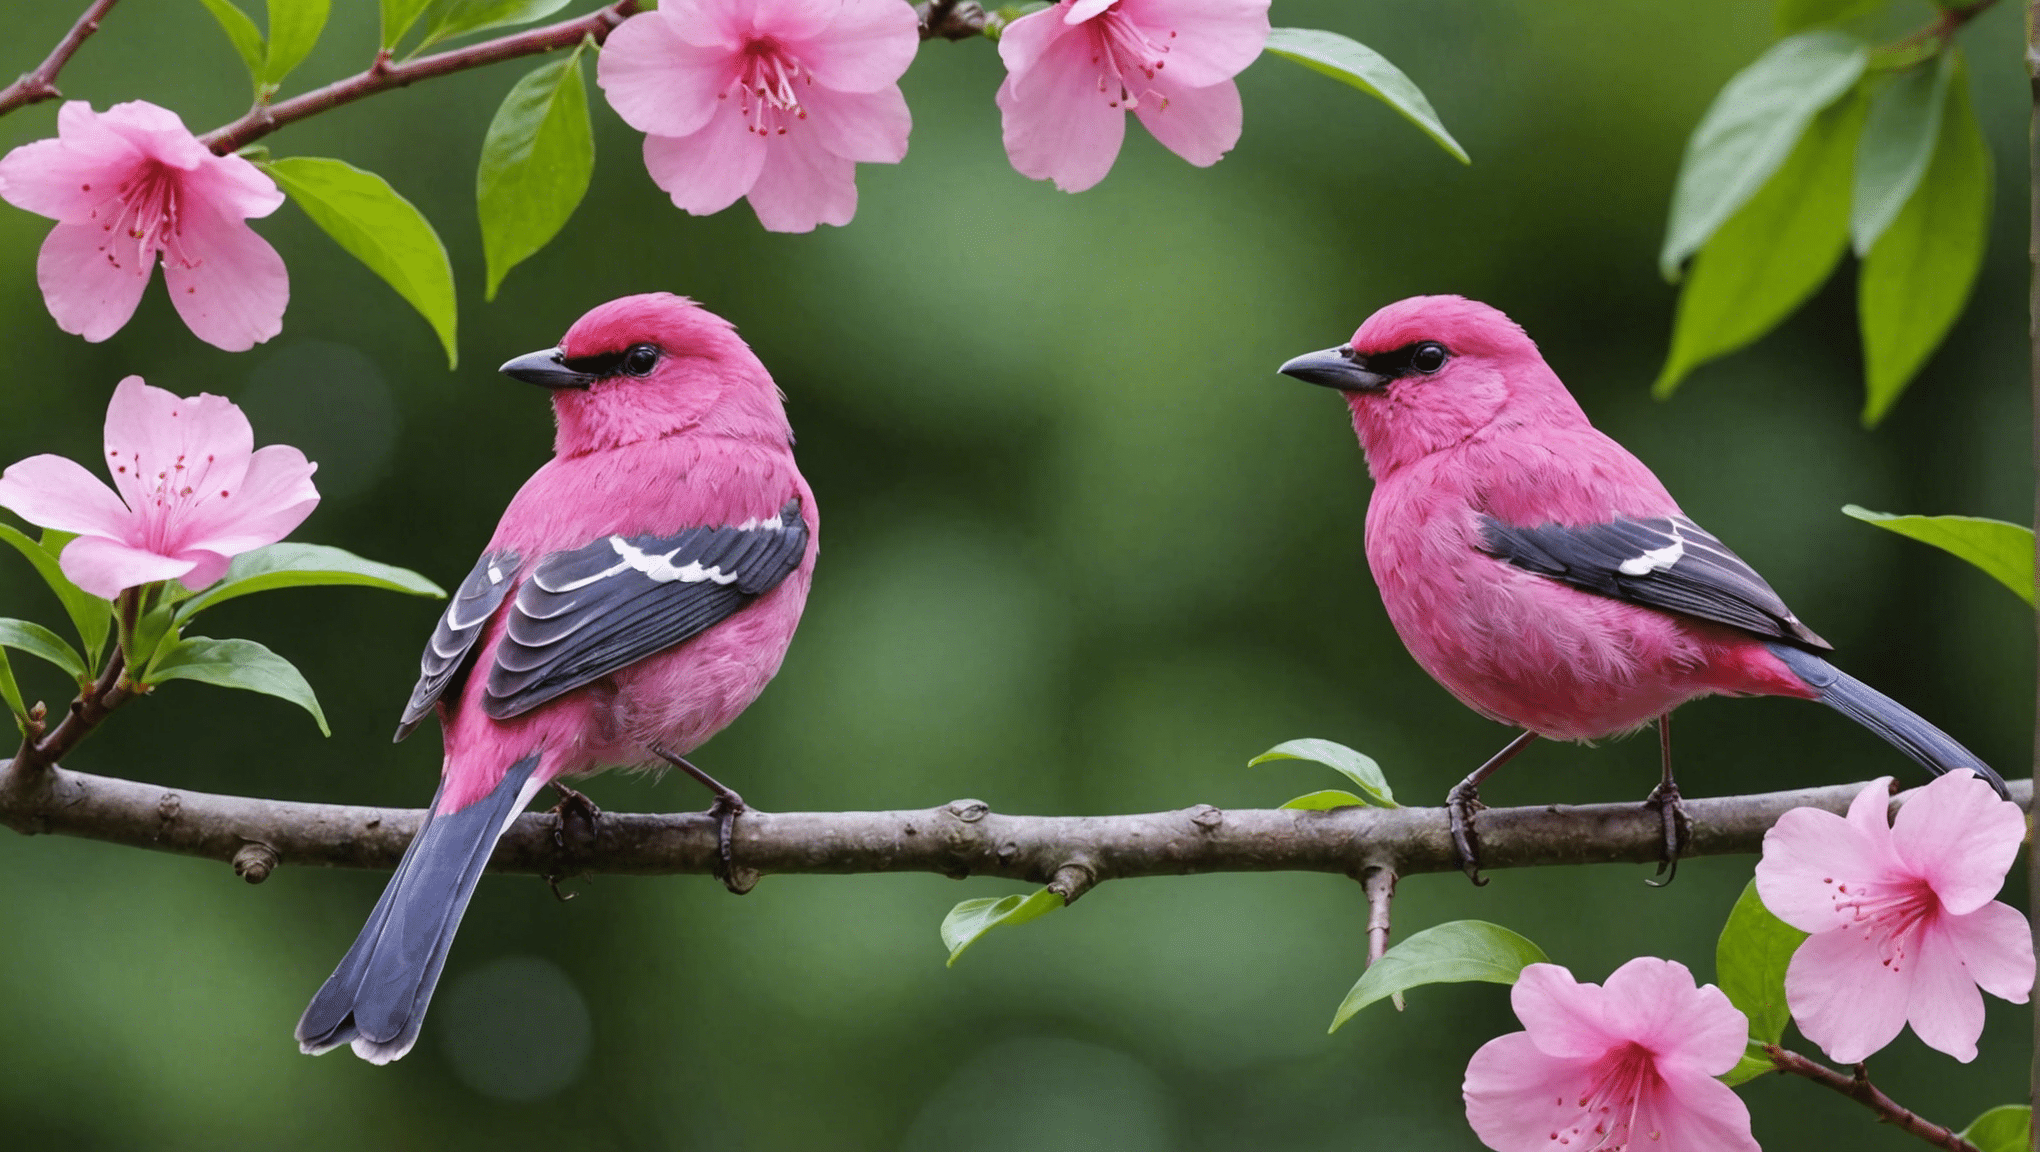 find out if pink birds are real with this intriguing discussion on the existence of pink birds, their characteristics, and their significance in the natural world.